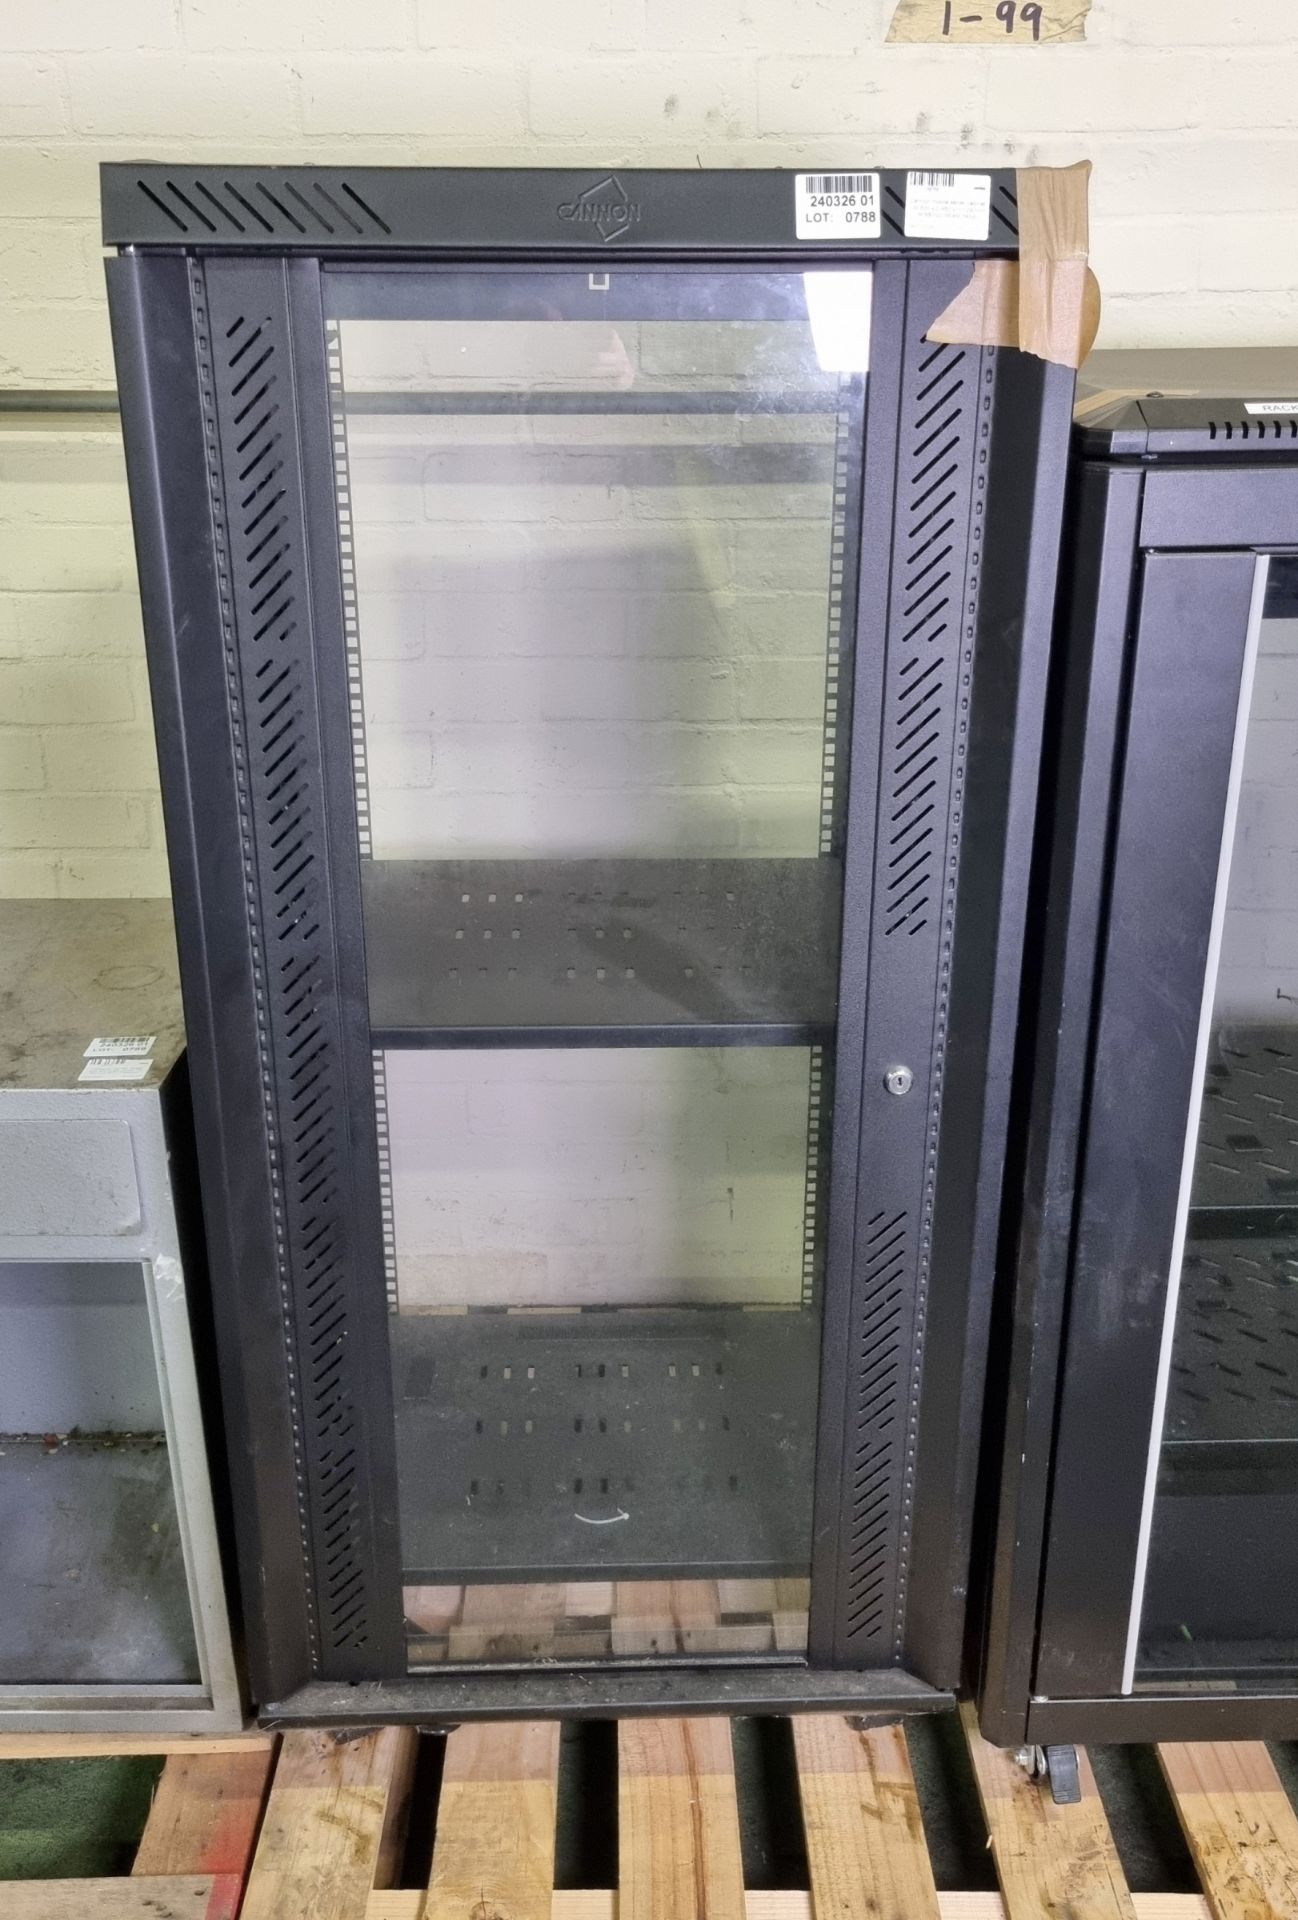 Cannon mobile server cabinet - W 600 x D 650 x H 1290mm - MISSING REAR PANEL